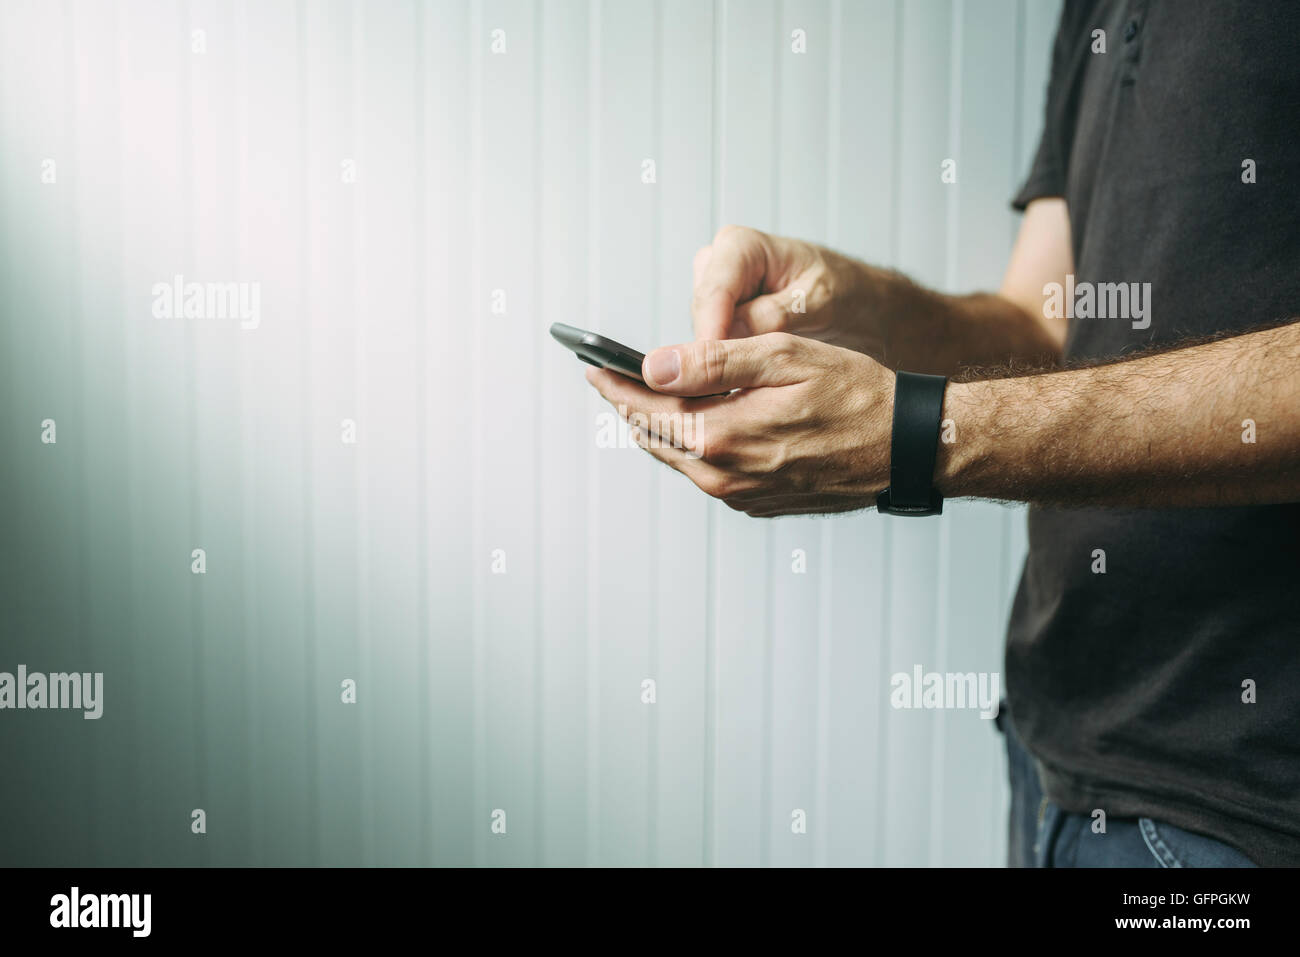 Casual man using smart phone to send text message, male hands holding mobile telephone device, selective focus Stock Photo